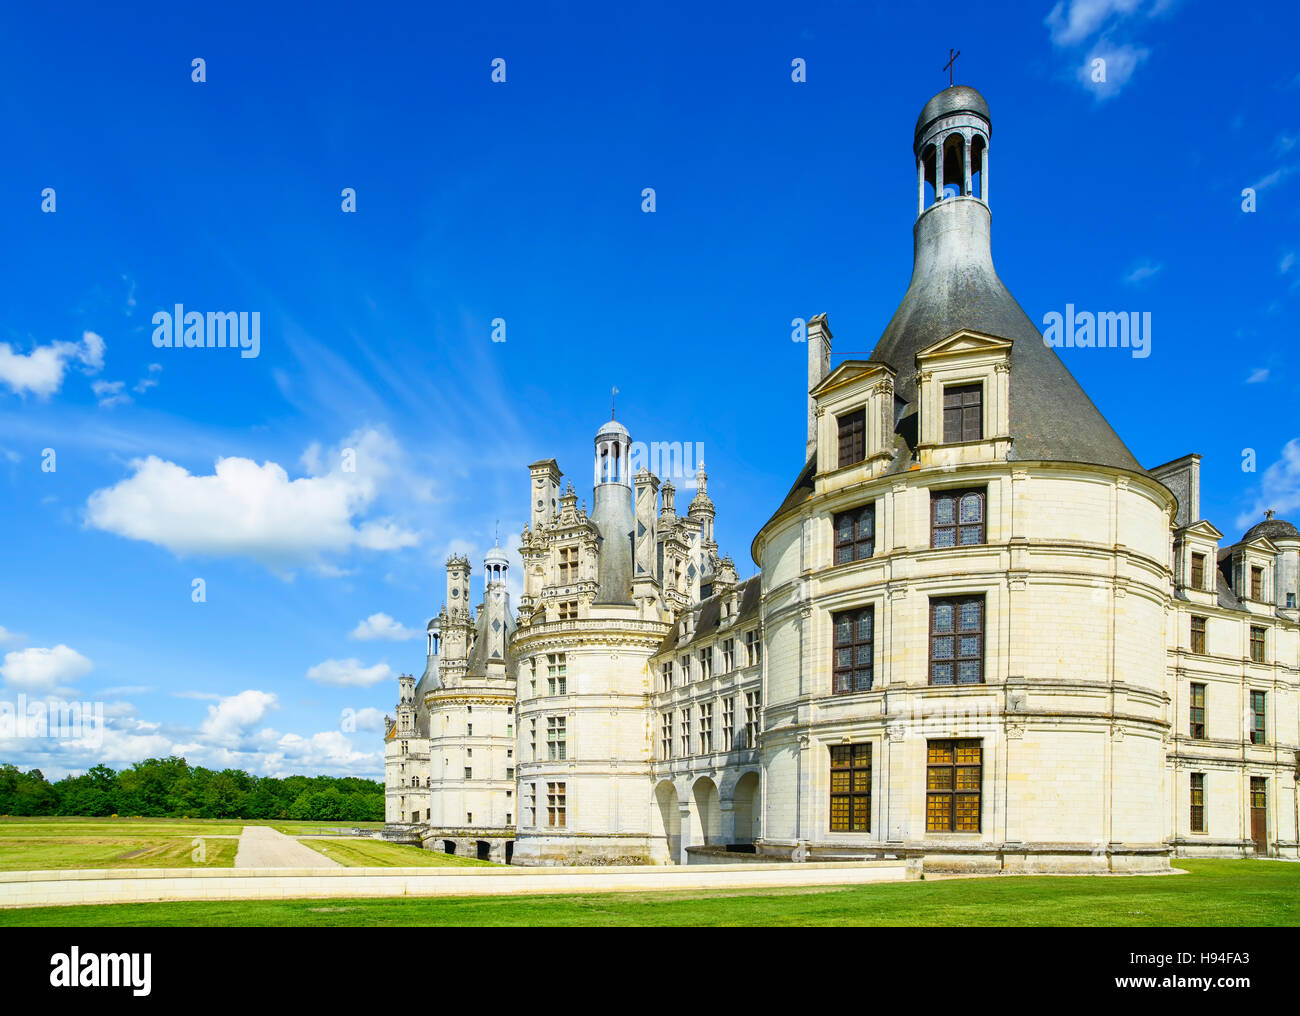 Chateau de Chambord, royal medieval french castle. Loire Valley, France, Europe. Unesco heritage site. Stock Photo